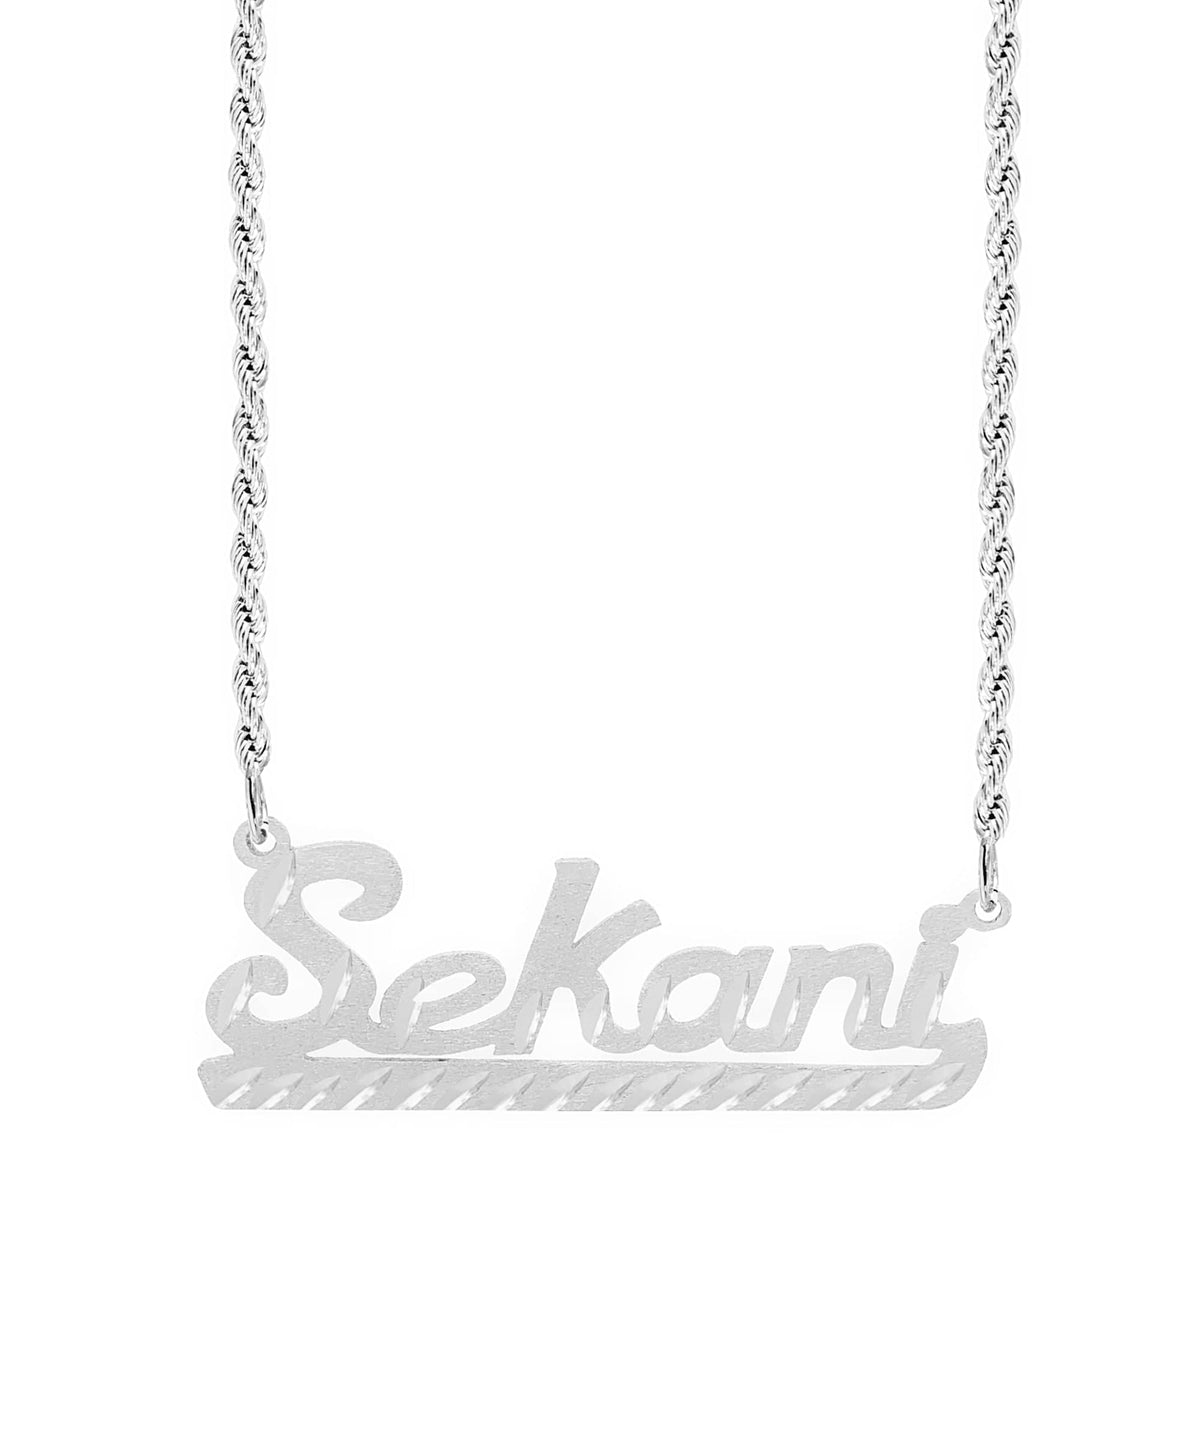 Personalized Name necklace with Diamond Cut &quot;Sekani&quot;